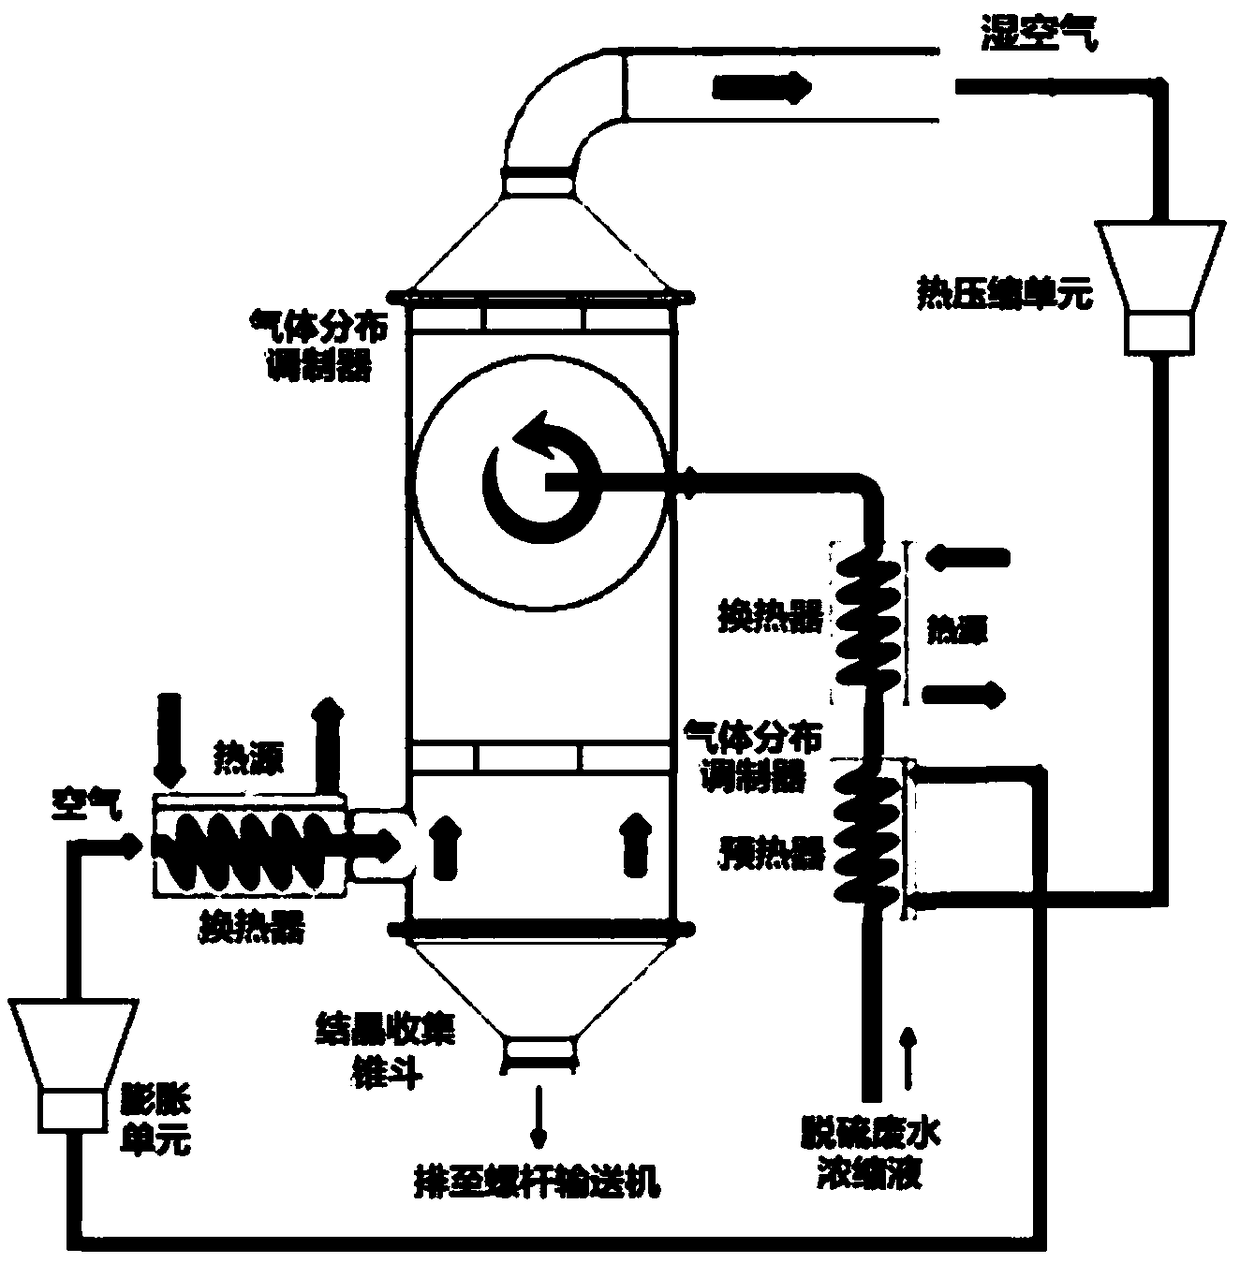 Hot wastewater concentrate fluidizing, crystallizing, and drying system and method of hot air pressure variable circulation